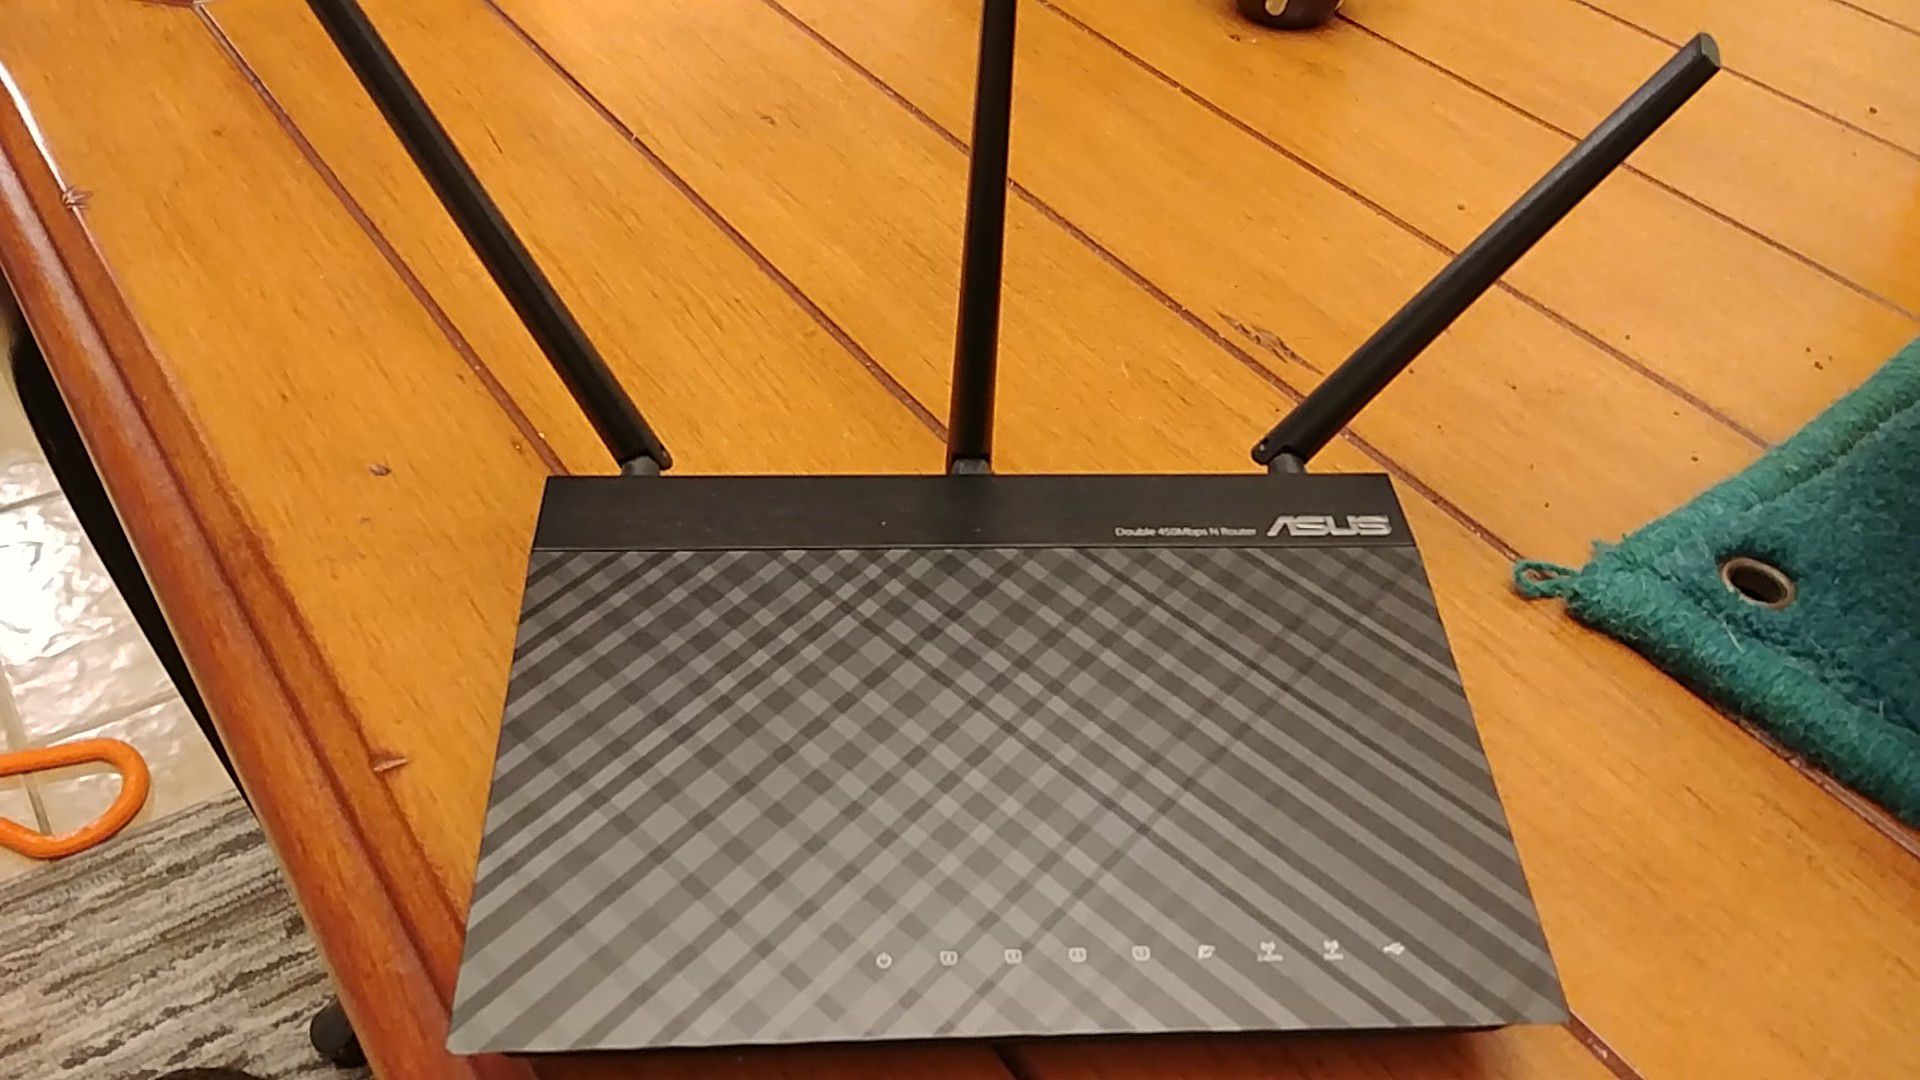 Asus RT-N66R 450Mbps Gaming Router